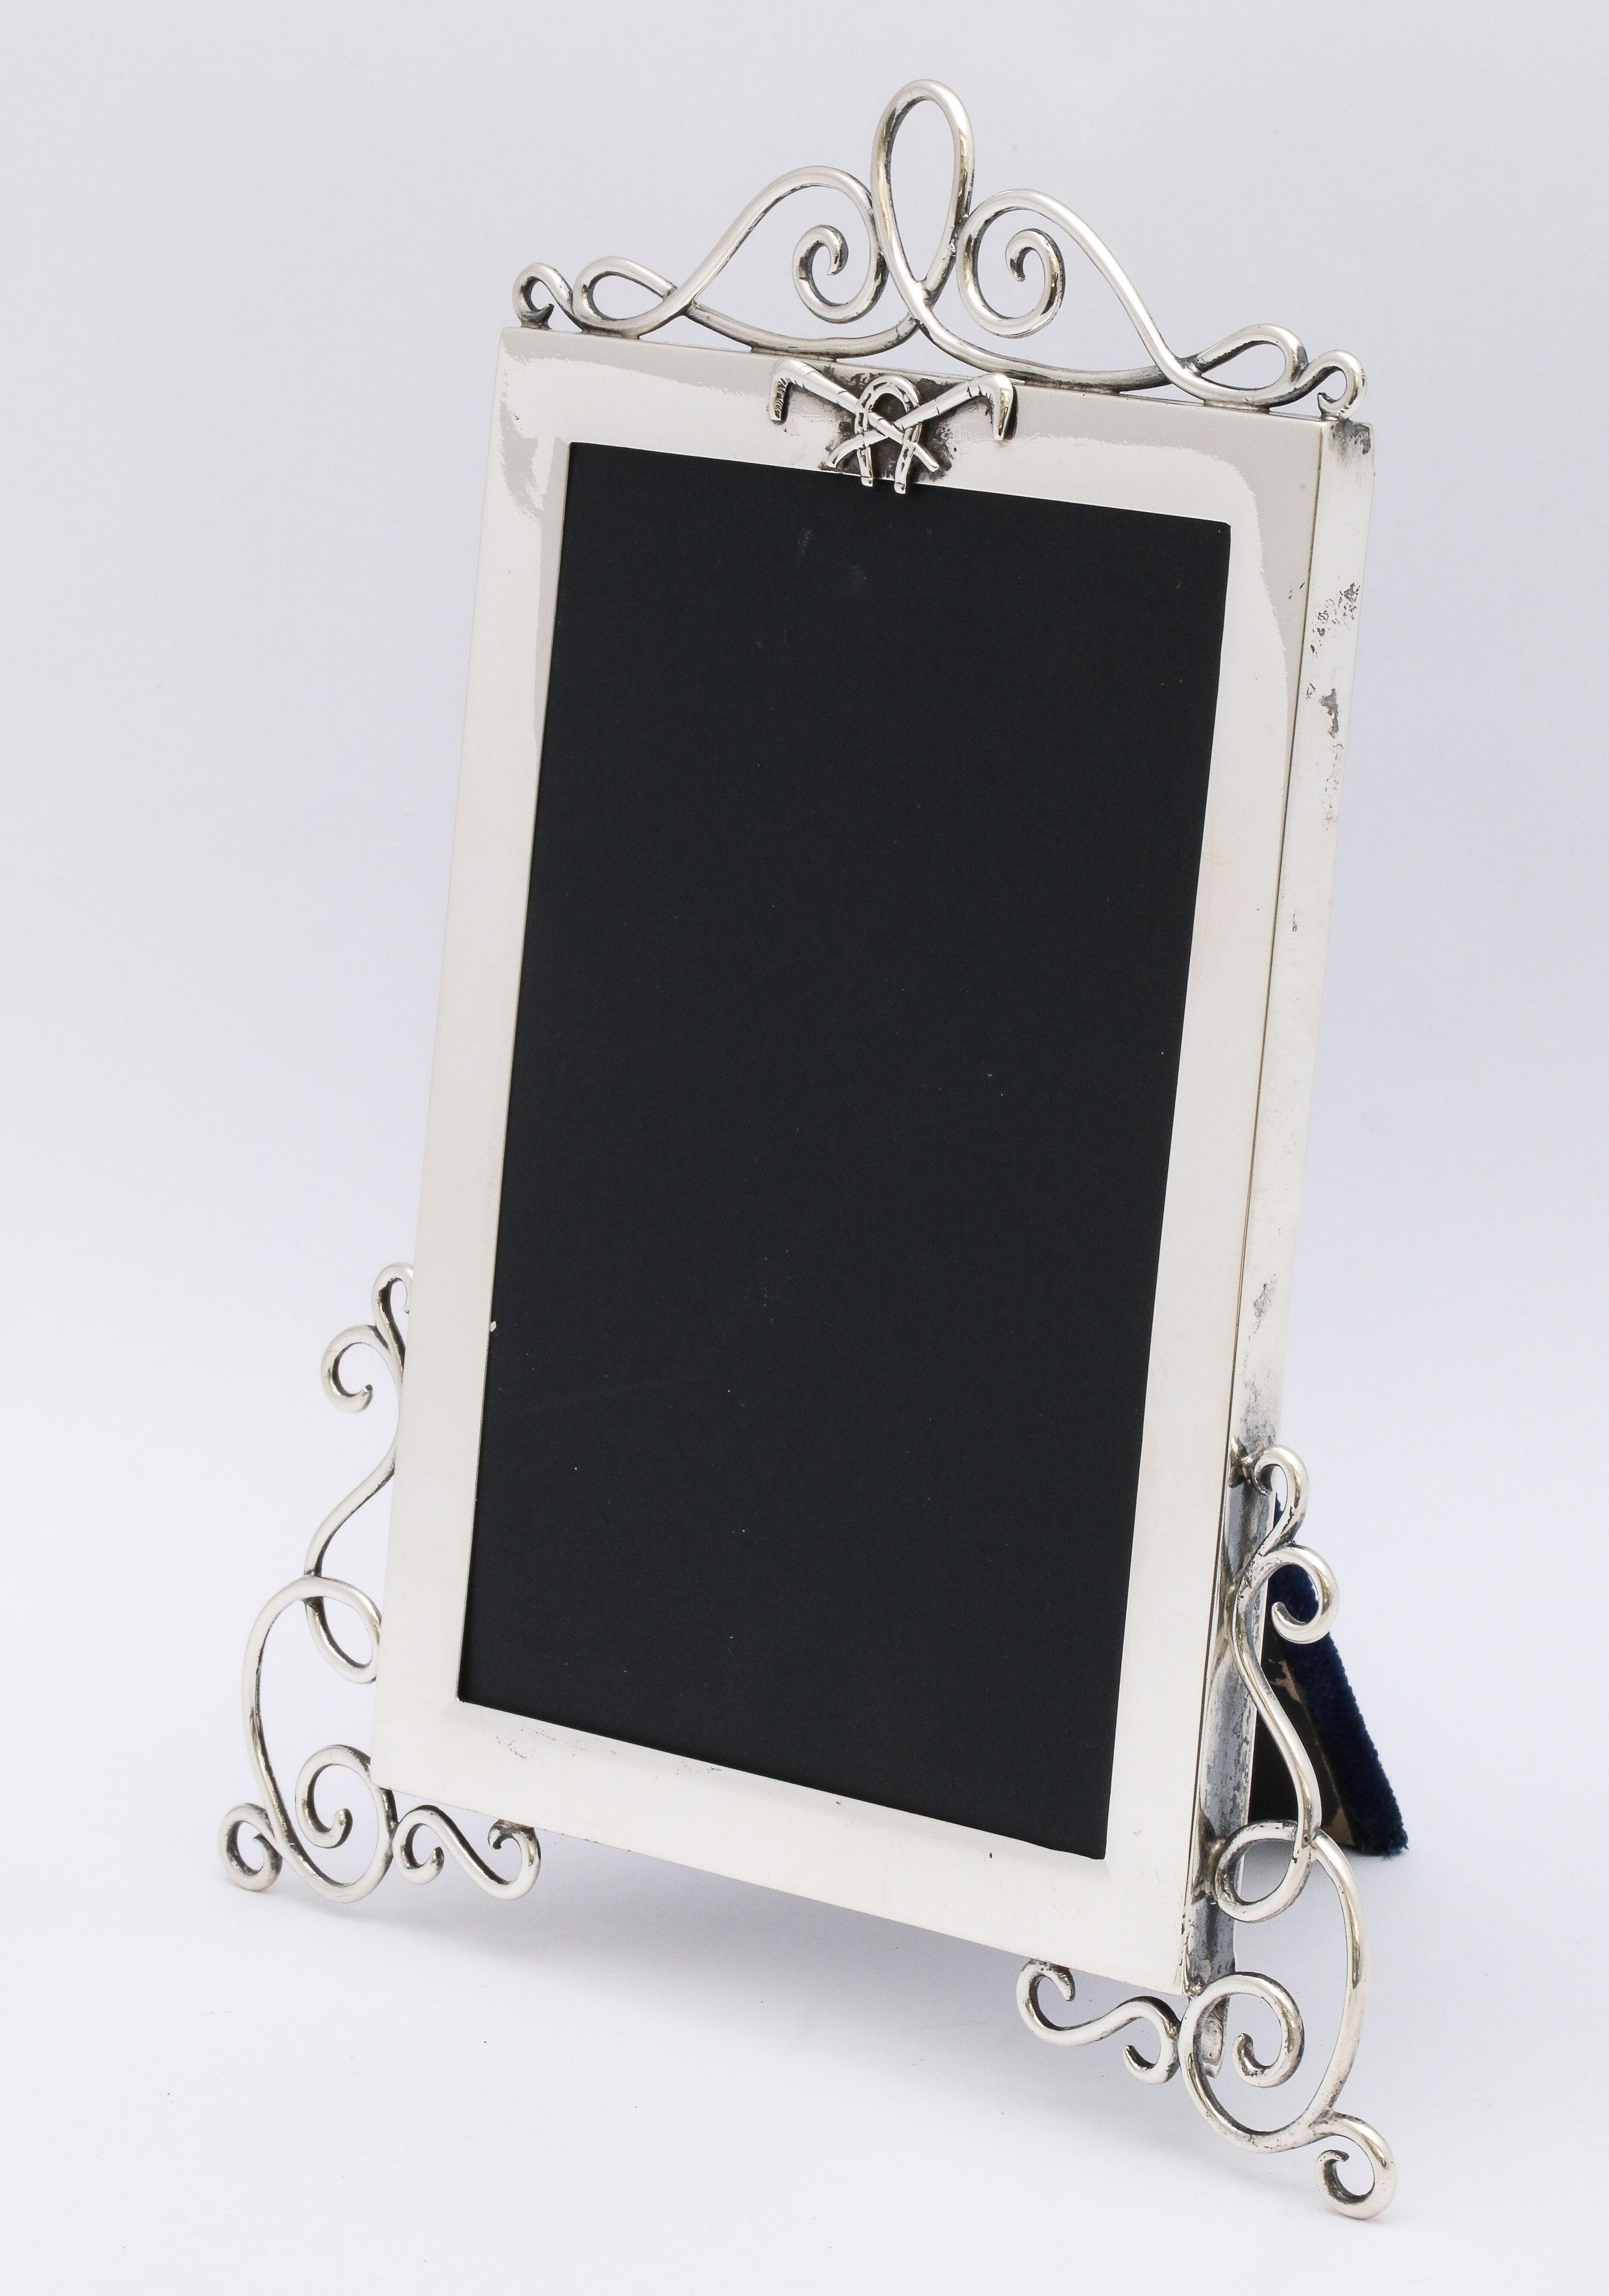 Rare, Victorian, sterling silver picture frame with equestrian motif, London, 1896, Goldsmiths and Silversmiths Co., Ltd - makers. A horseshoe and two crossed riding crops decorate the top of the frame. Frame has curled wire decoration at the top.